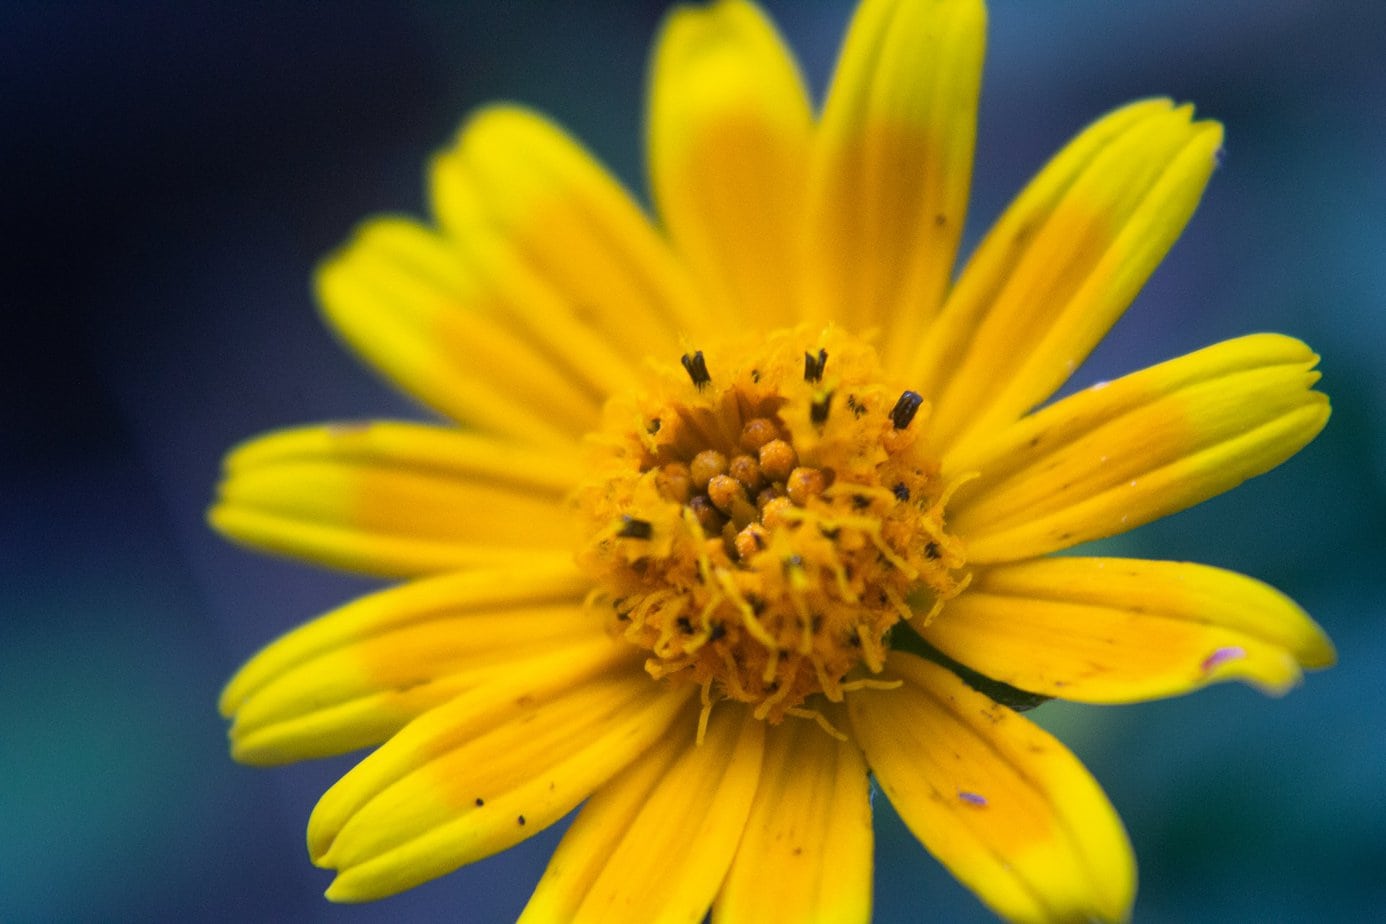 Arnica – not only for health, but also for beauty